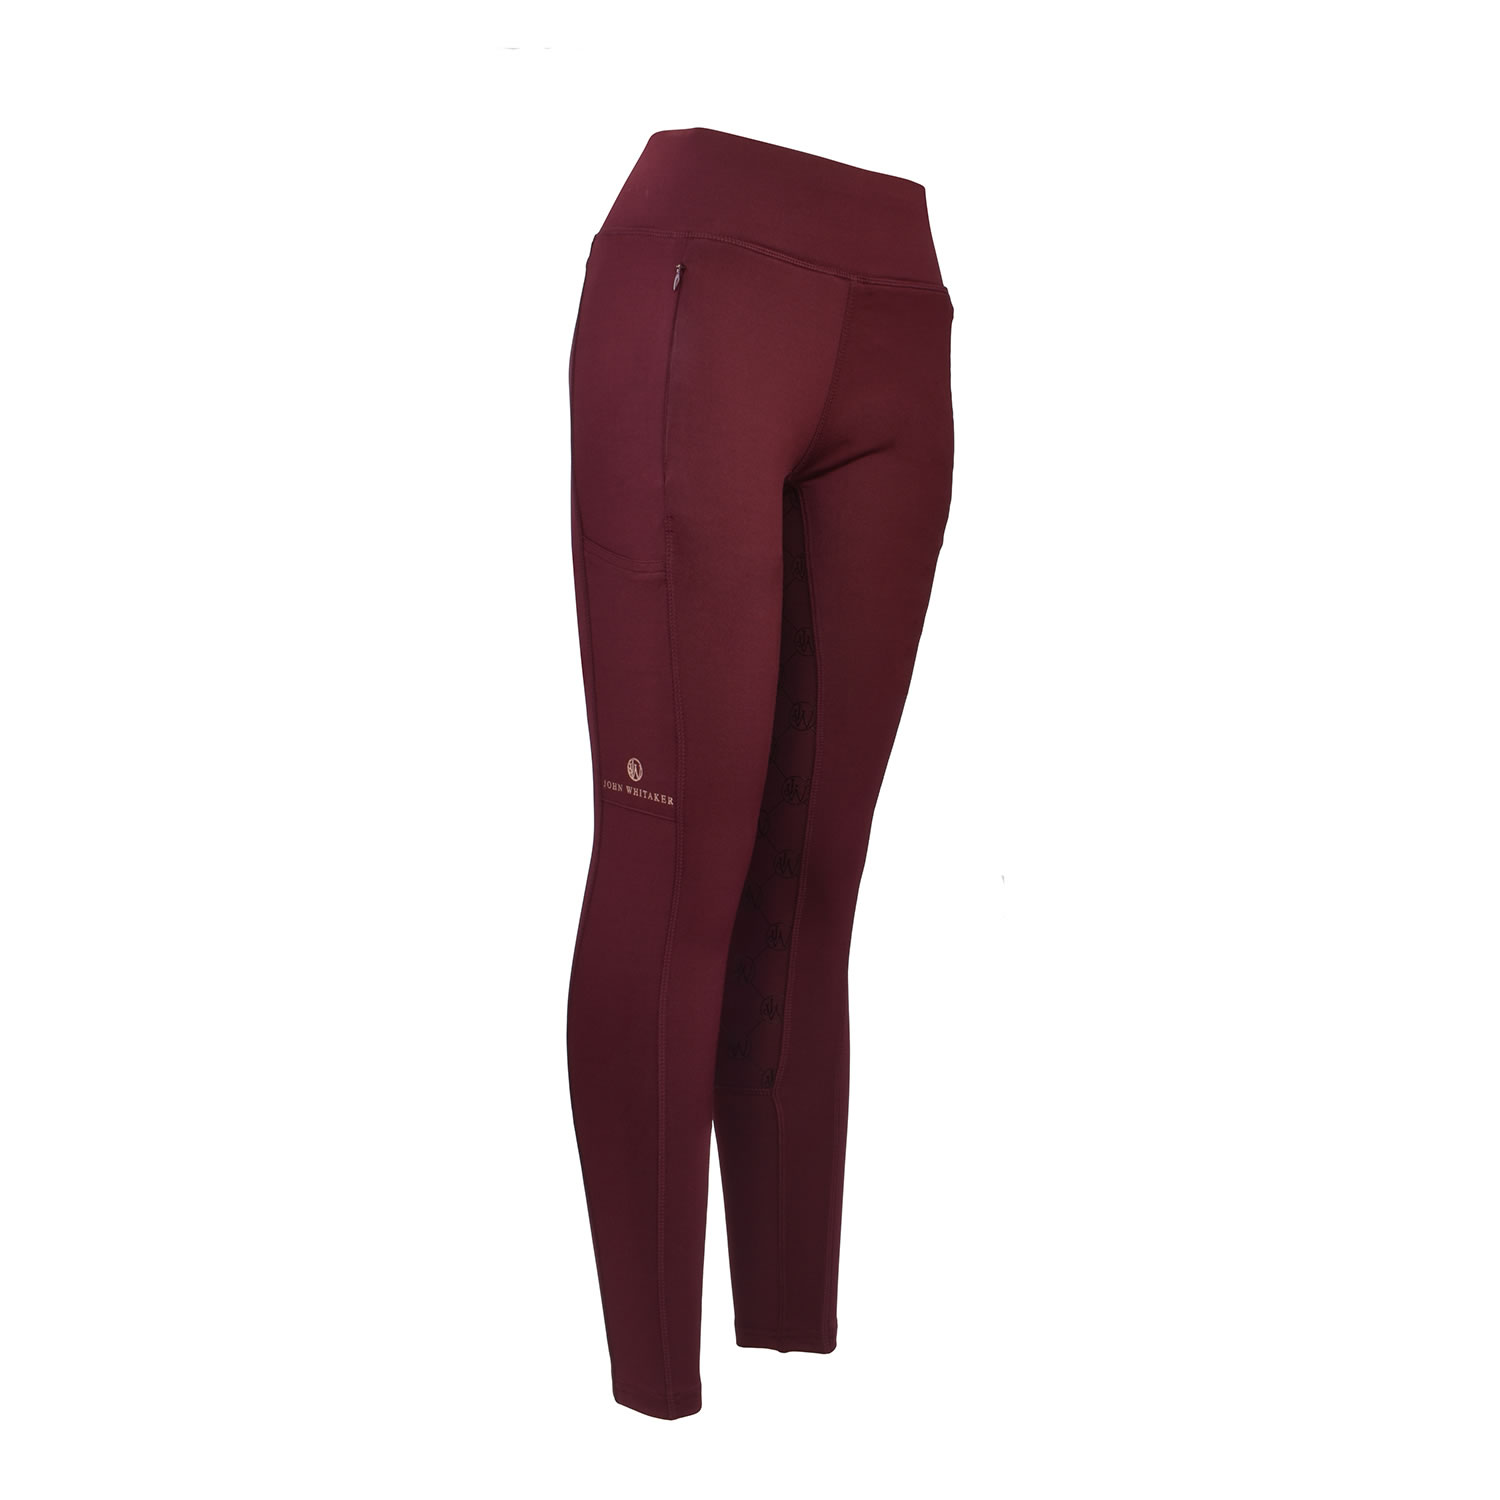 WHITAKER LEGEND RIDING TIGHTS BURGUNDY SMALL SMALL LADIES